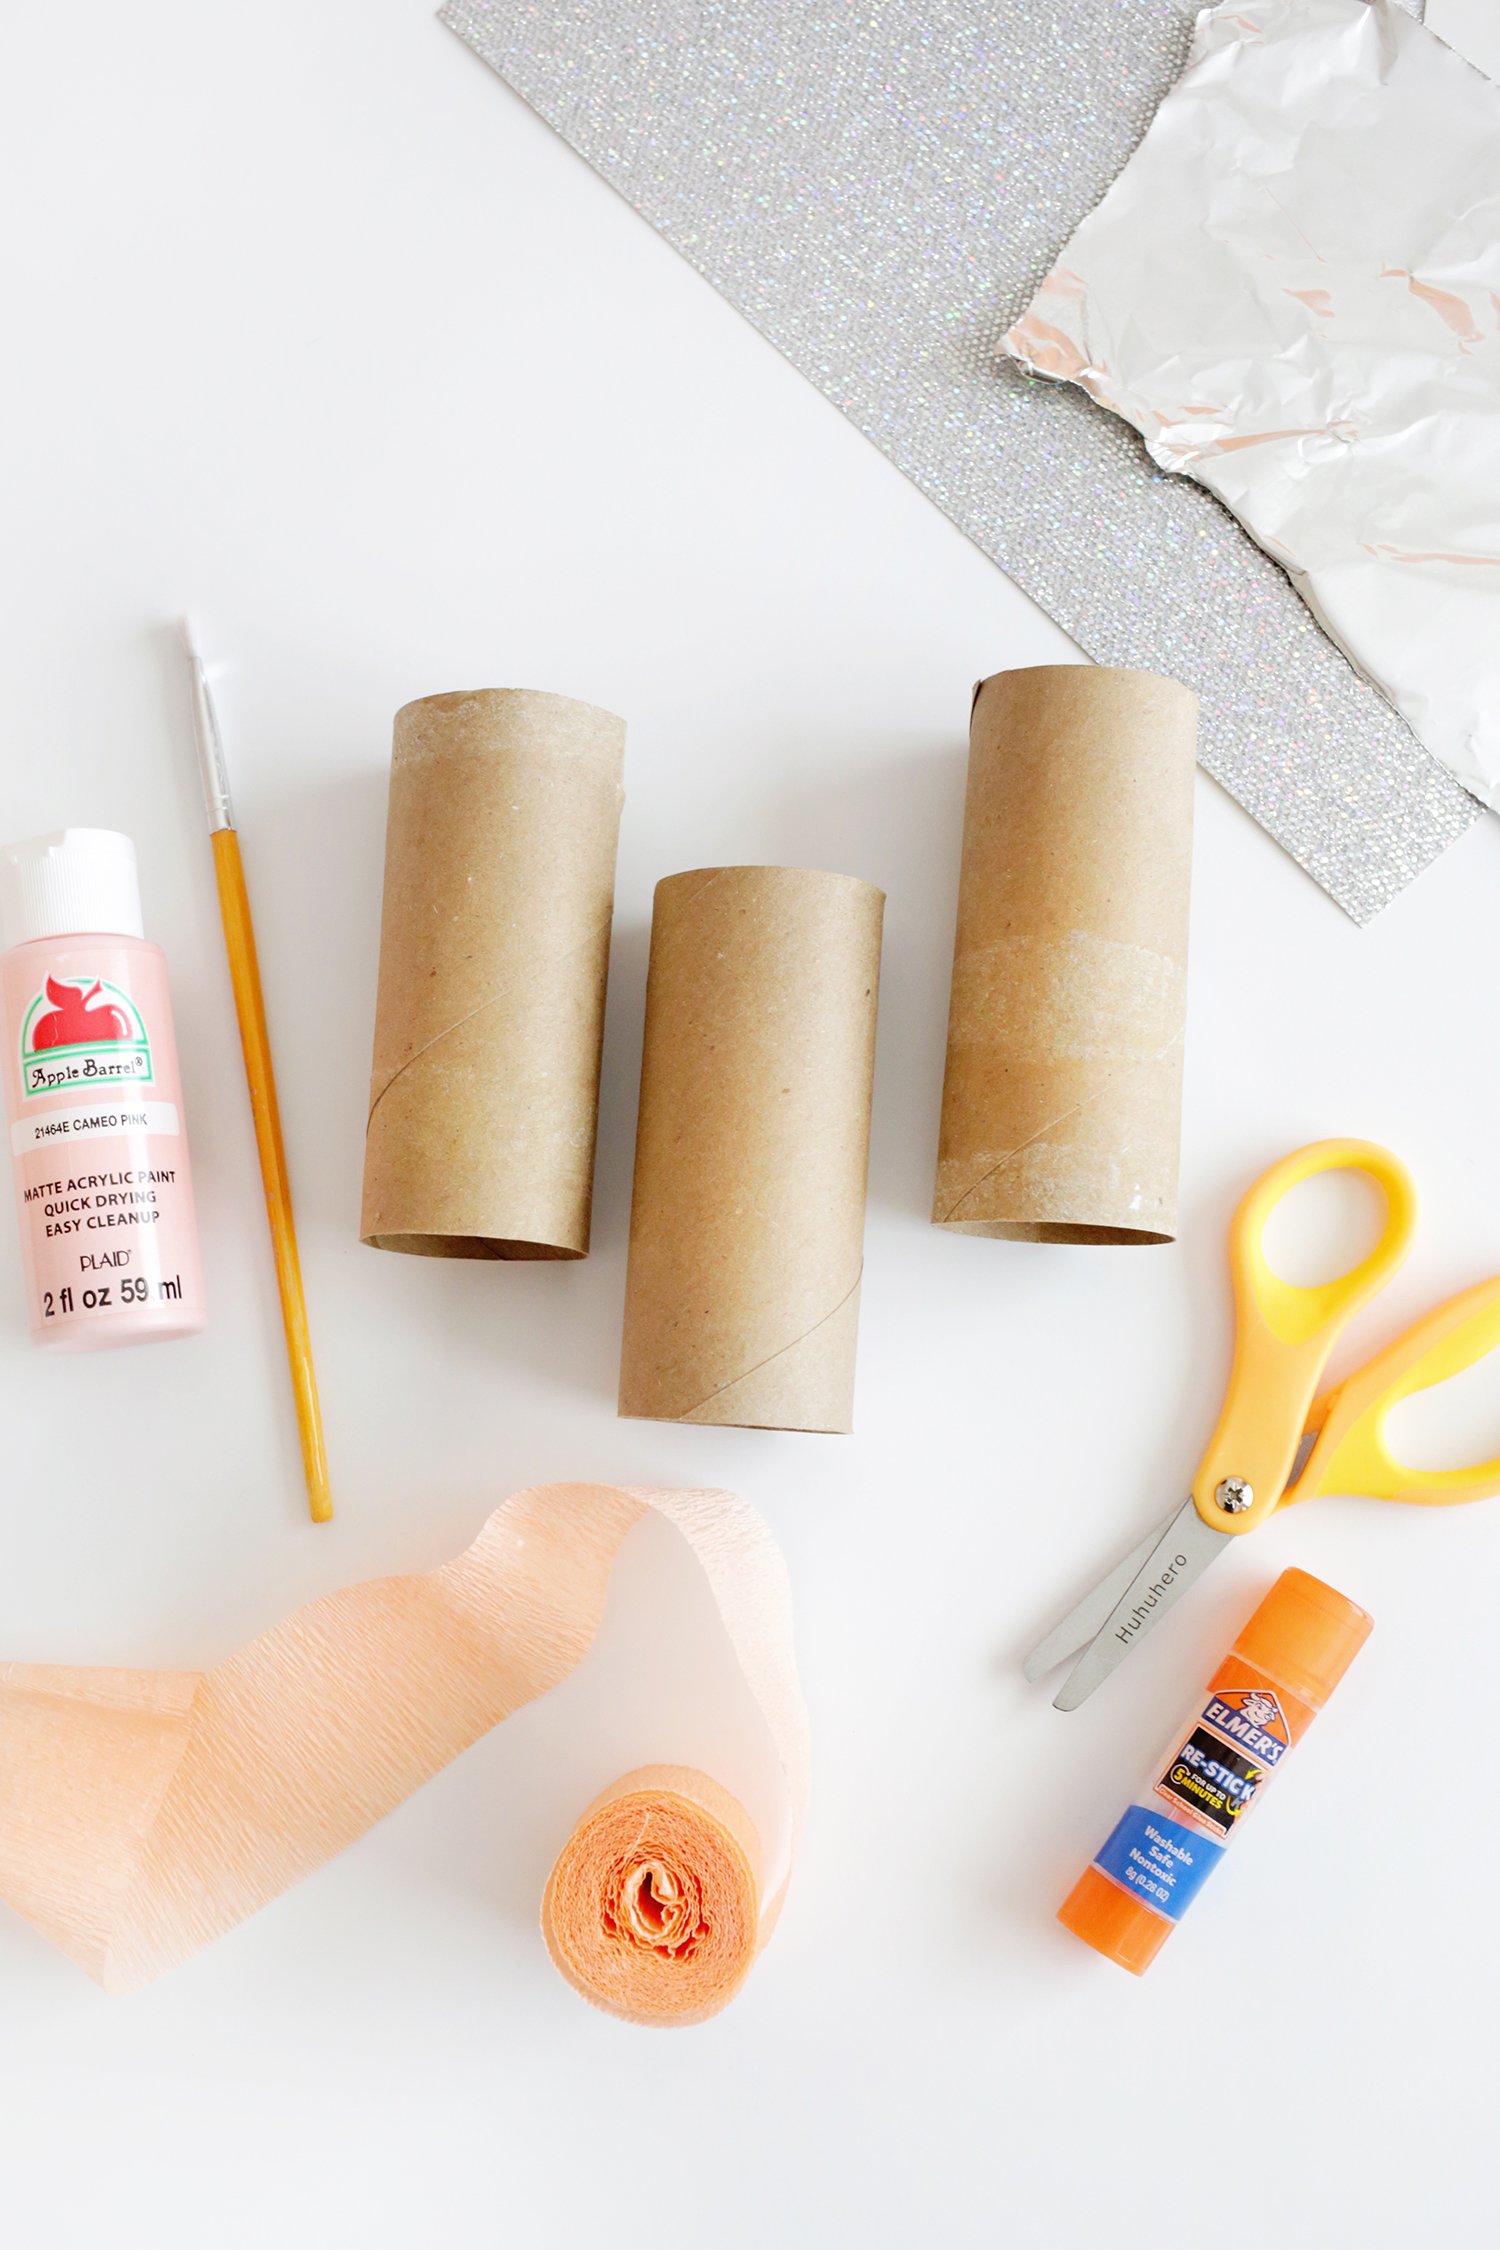 cardboard toilet paper tubes, paint and brush, crepe paper, scissors, and glue